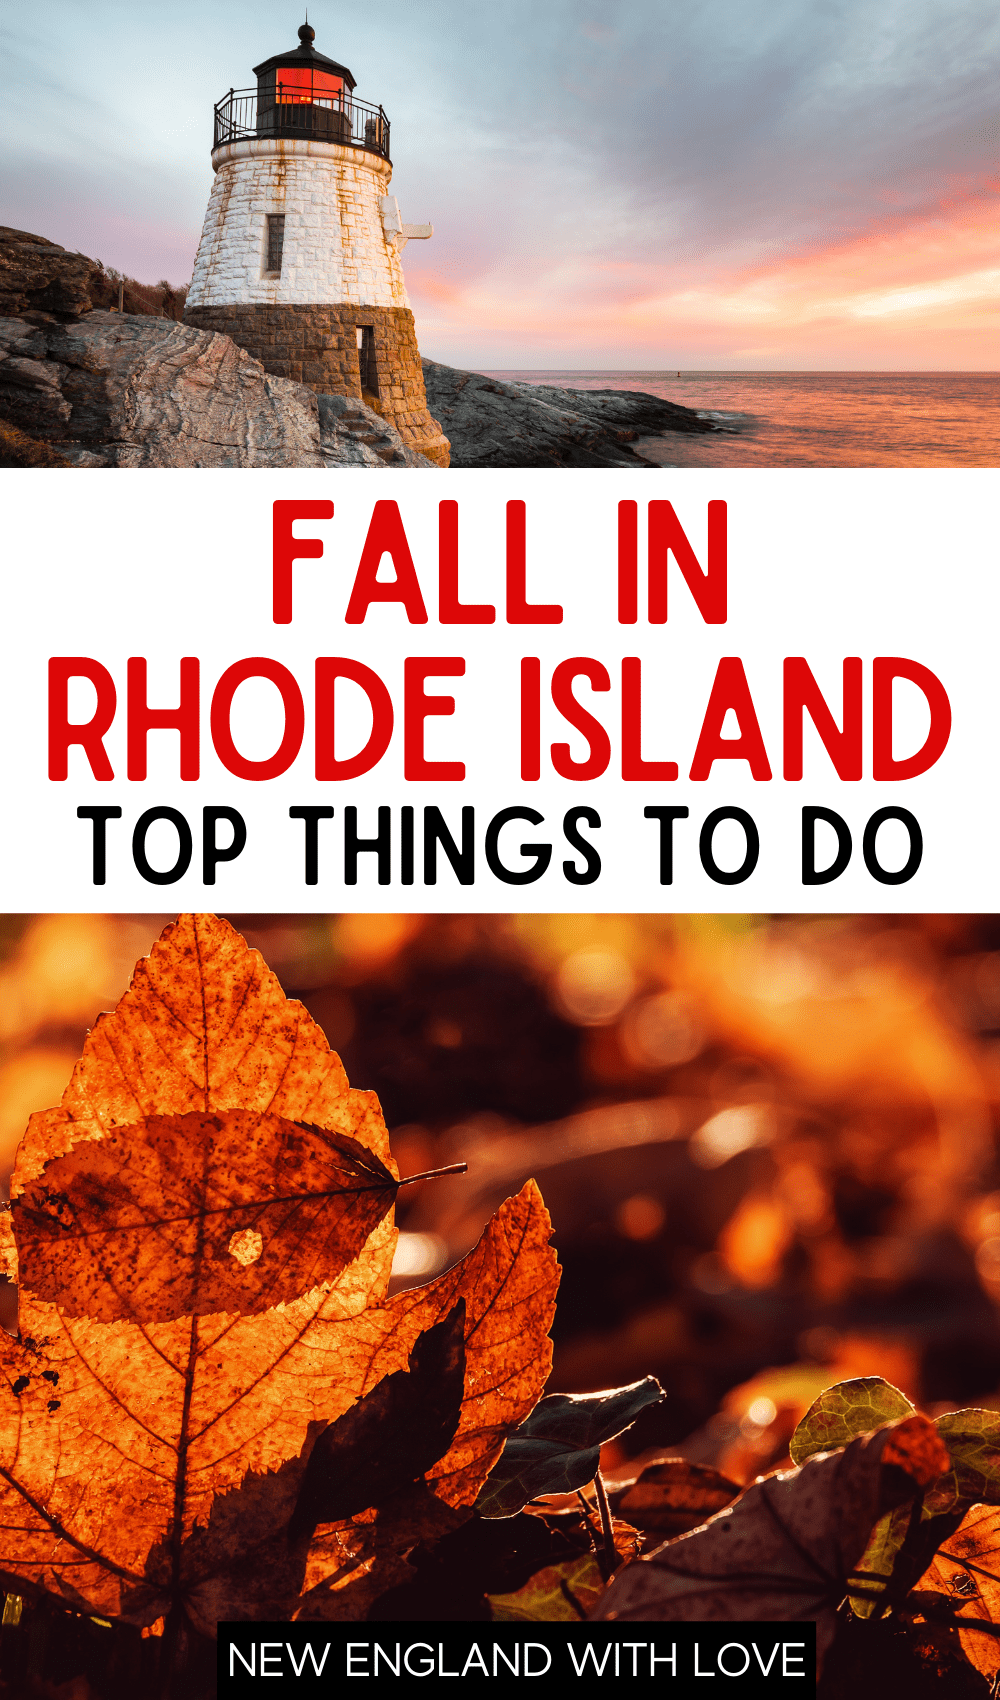 Pinterest graphic reading "Fall in Rhode Island Top Things To Do"